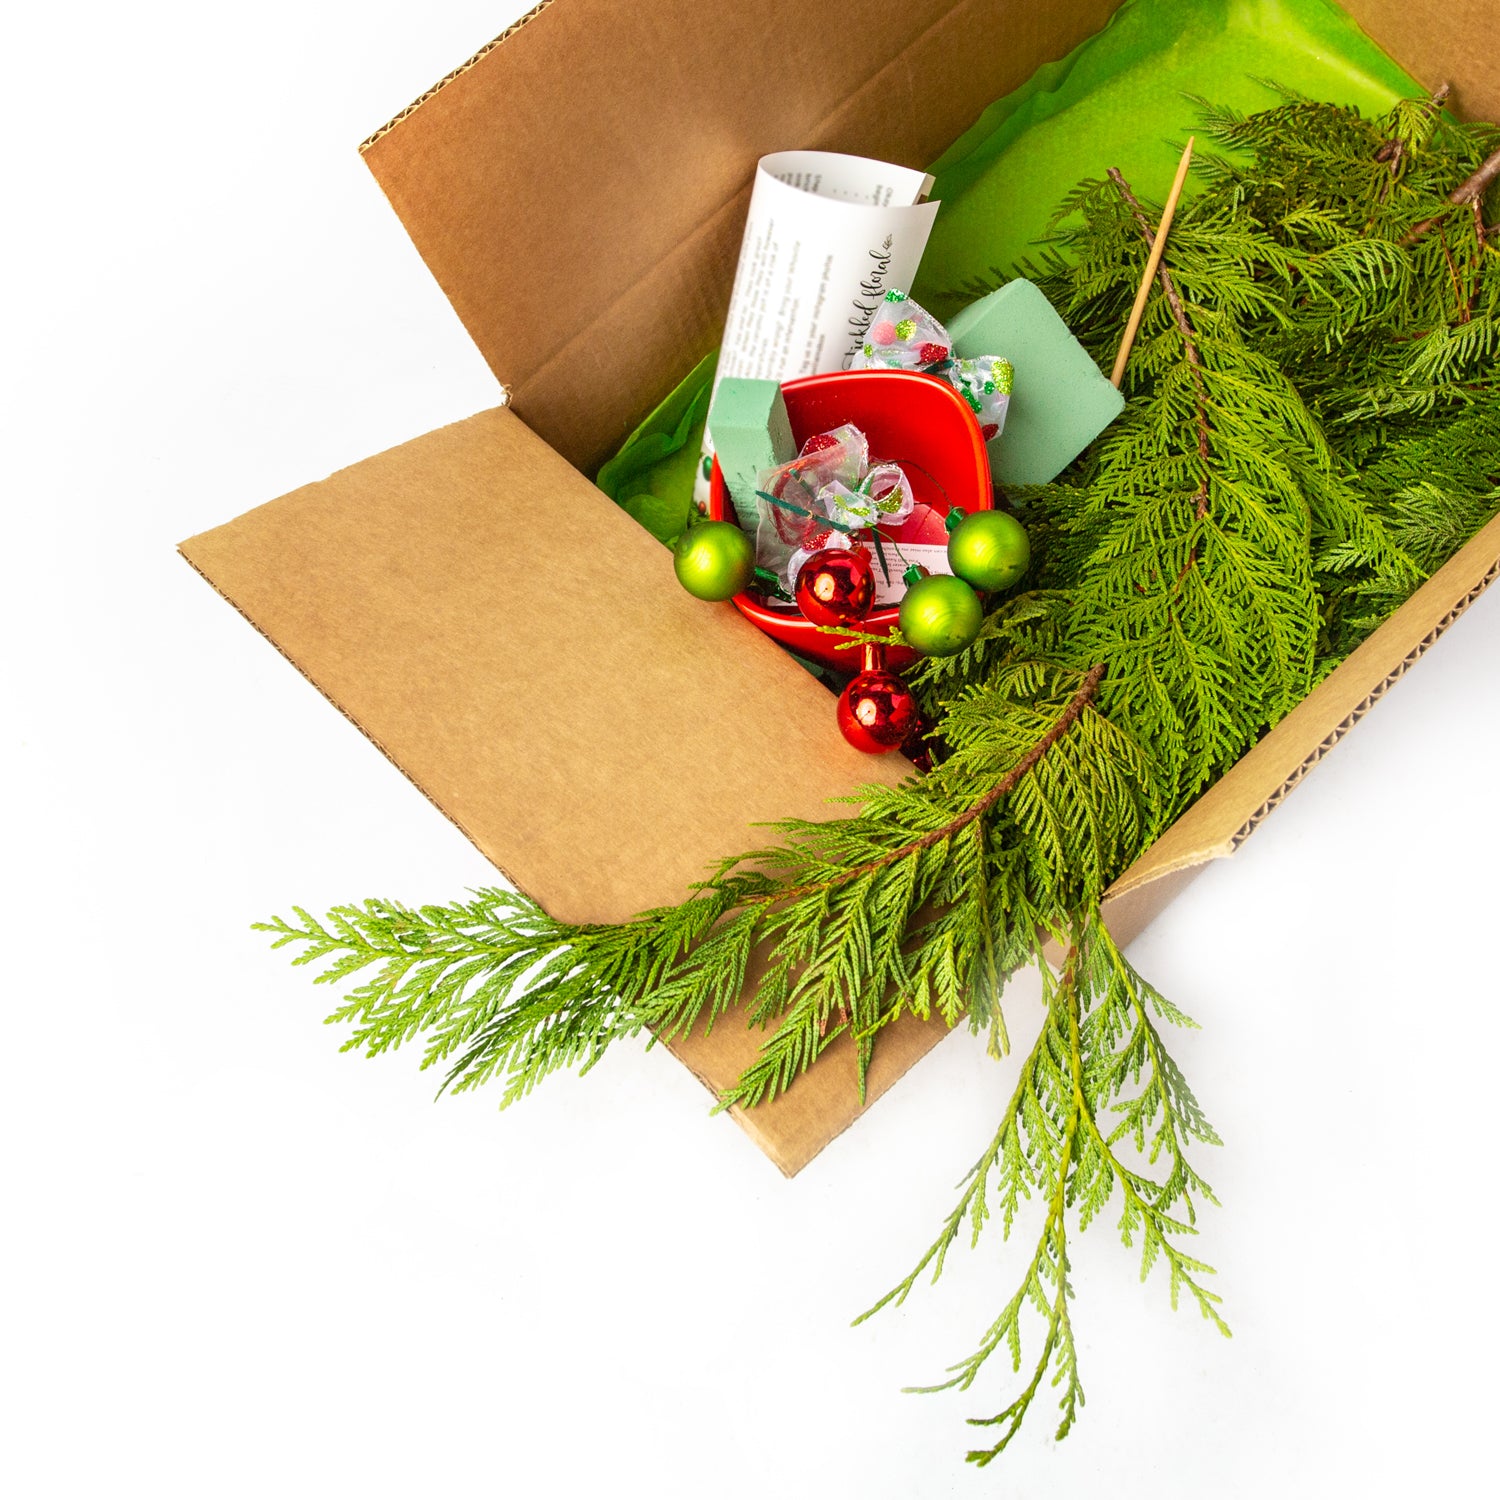 DIY Whoville Tree in a Box - Individual